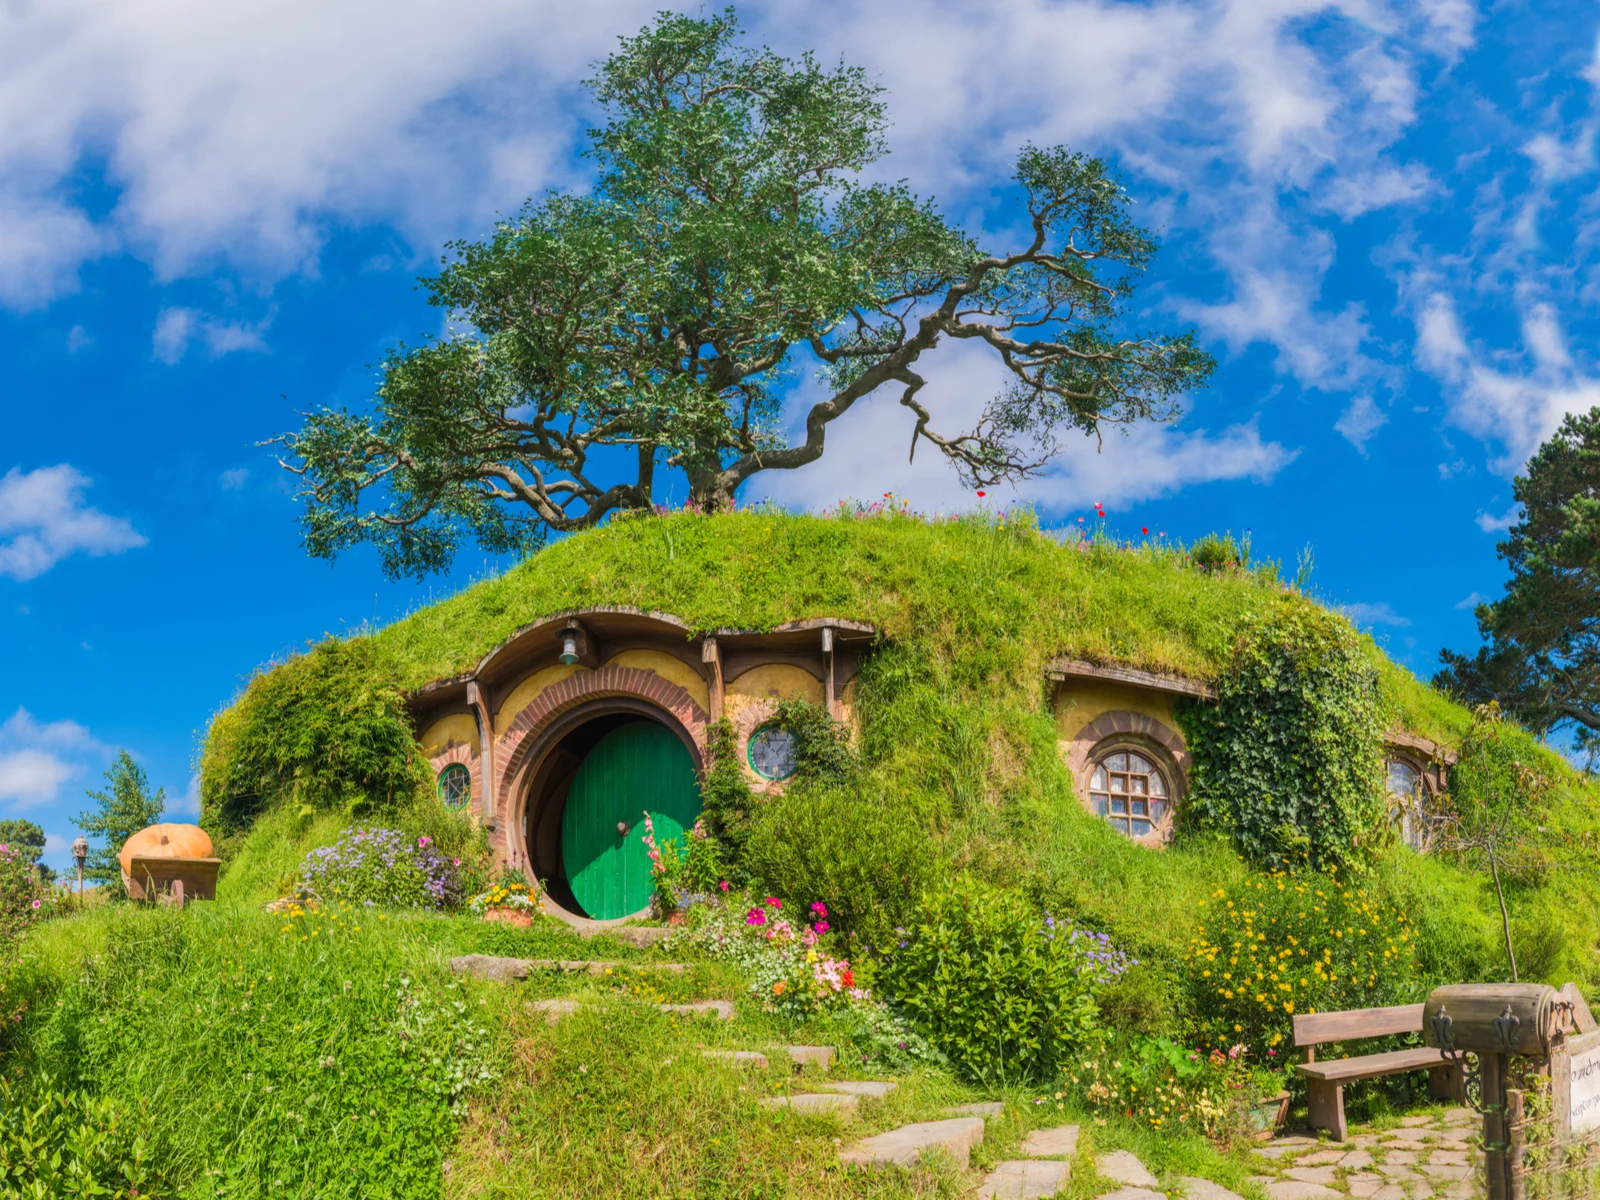 Weird-looking house with circular door and windows and grass-covered walls and roofs is one of the Lord of the Rings Filming Locations you can visit